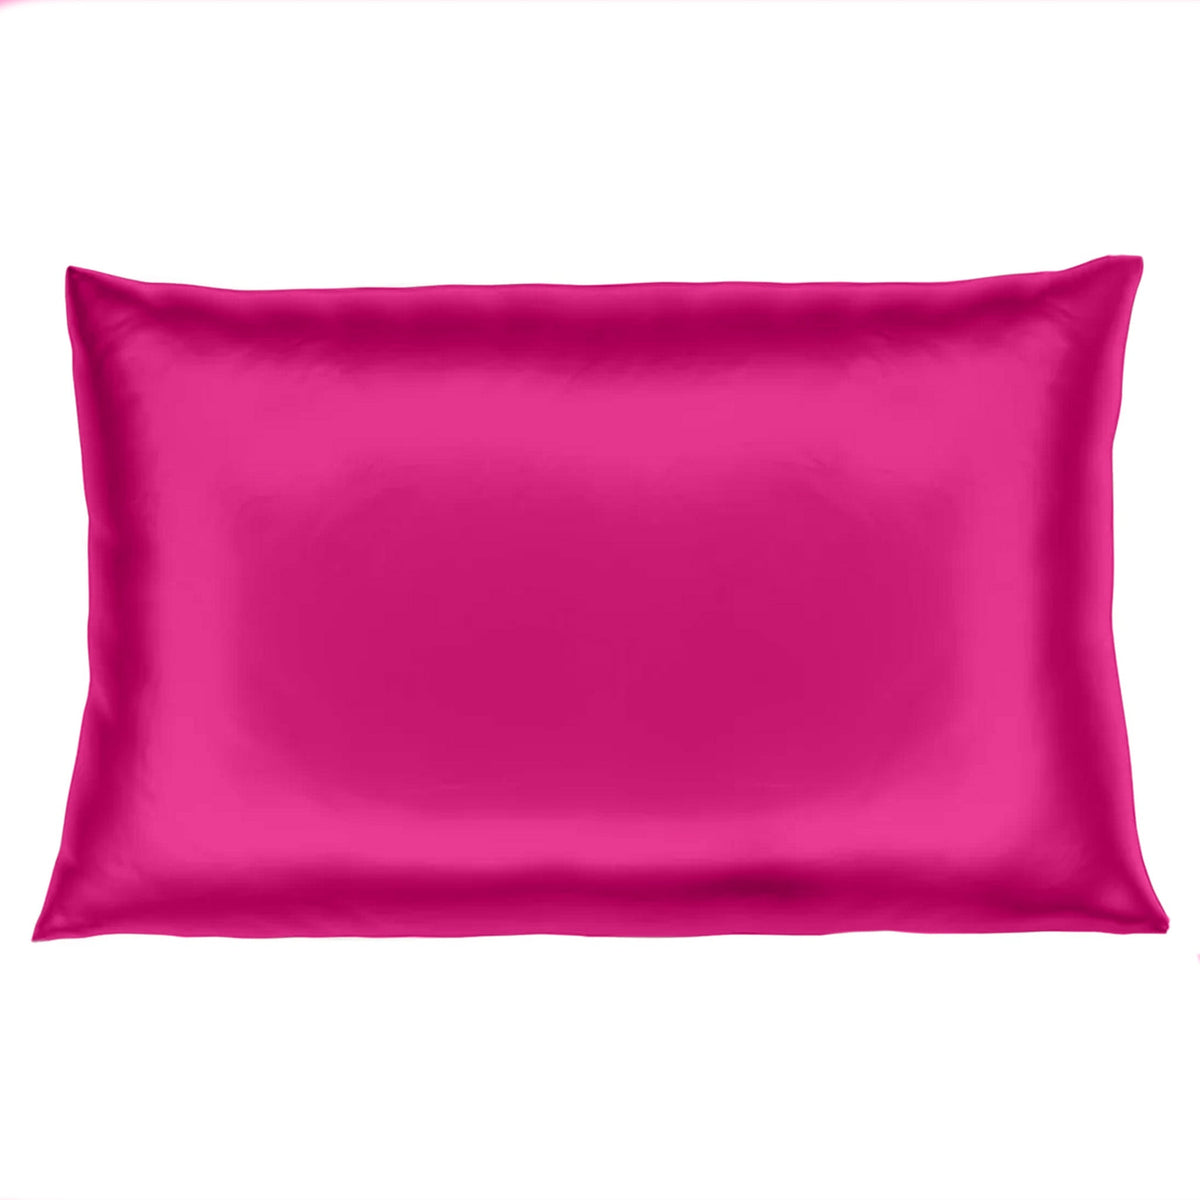 Mulberry Park Silks Deluxe 19 Momme Pure Silk Pillowcase in Magenta Color